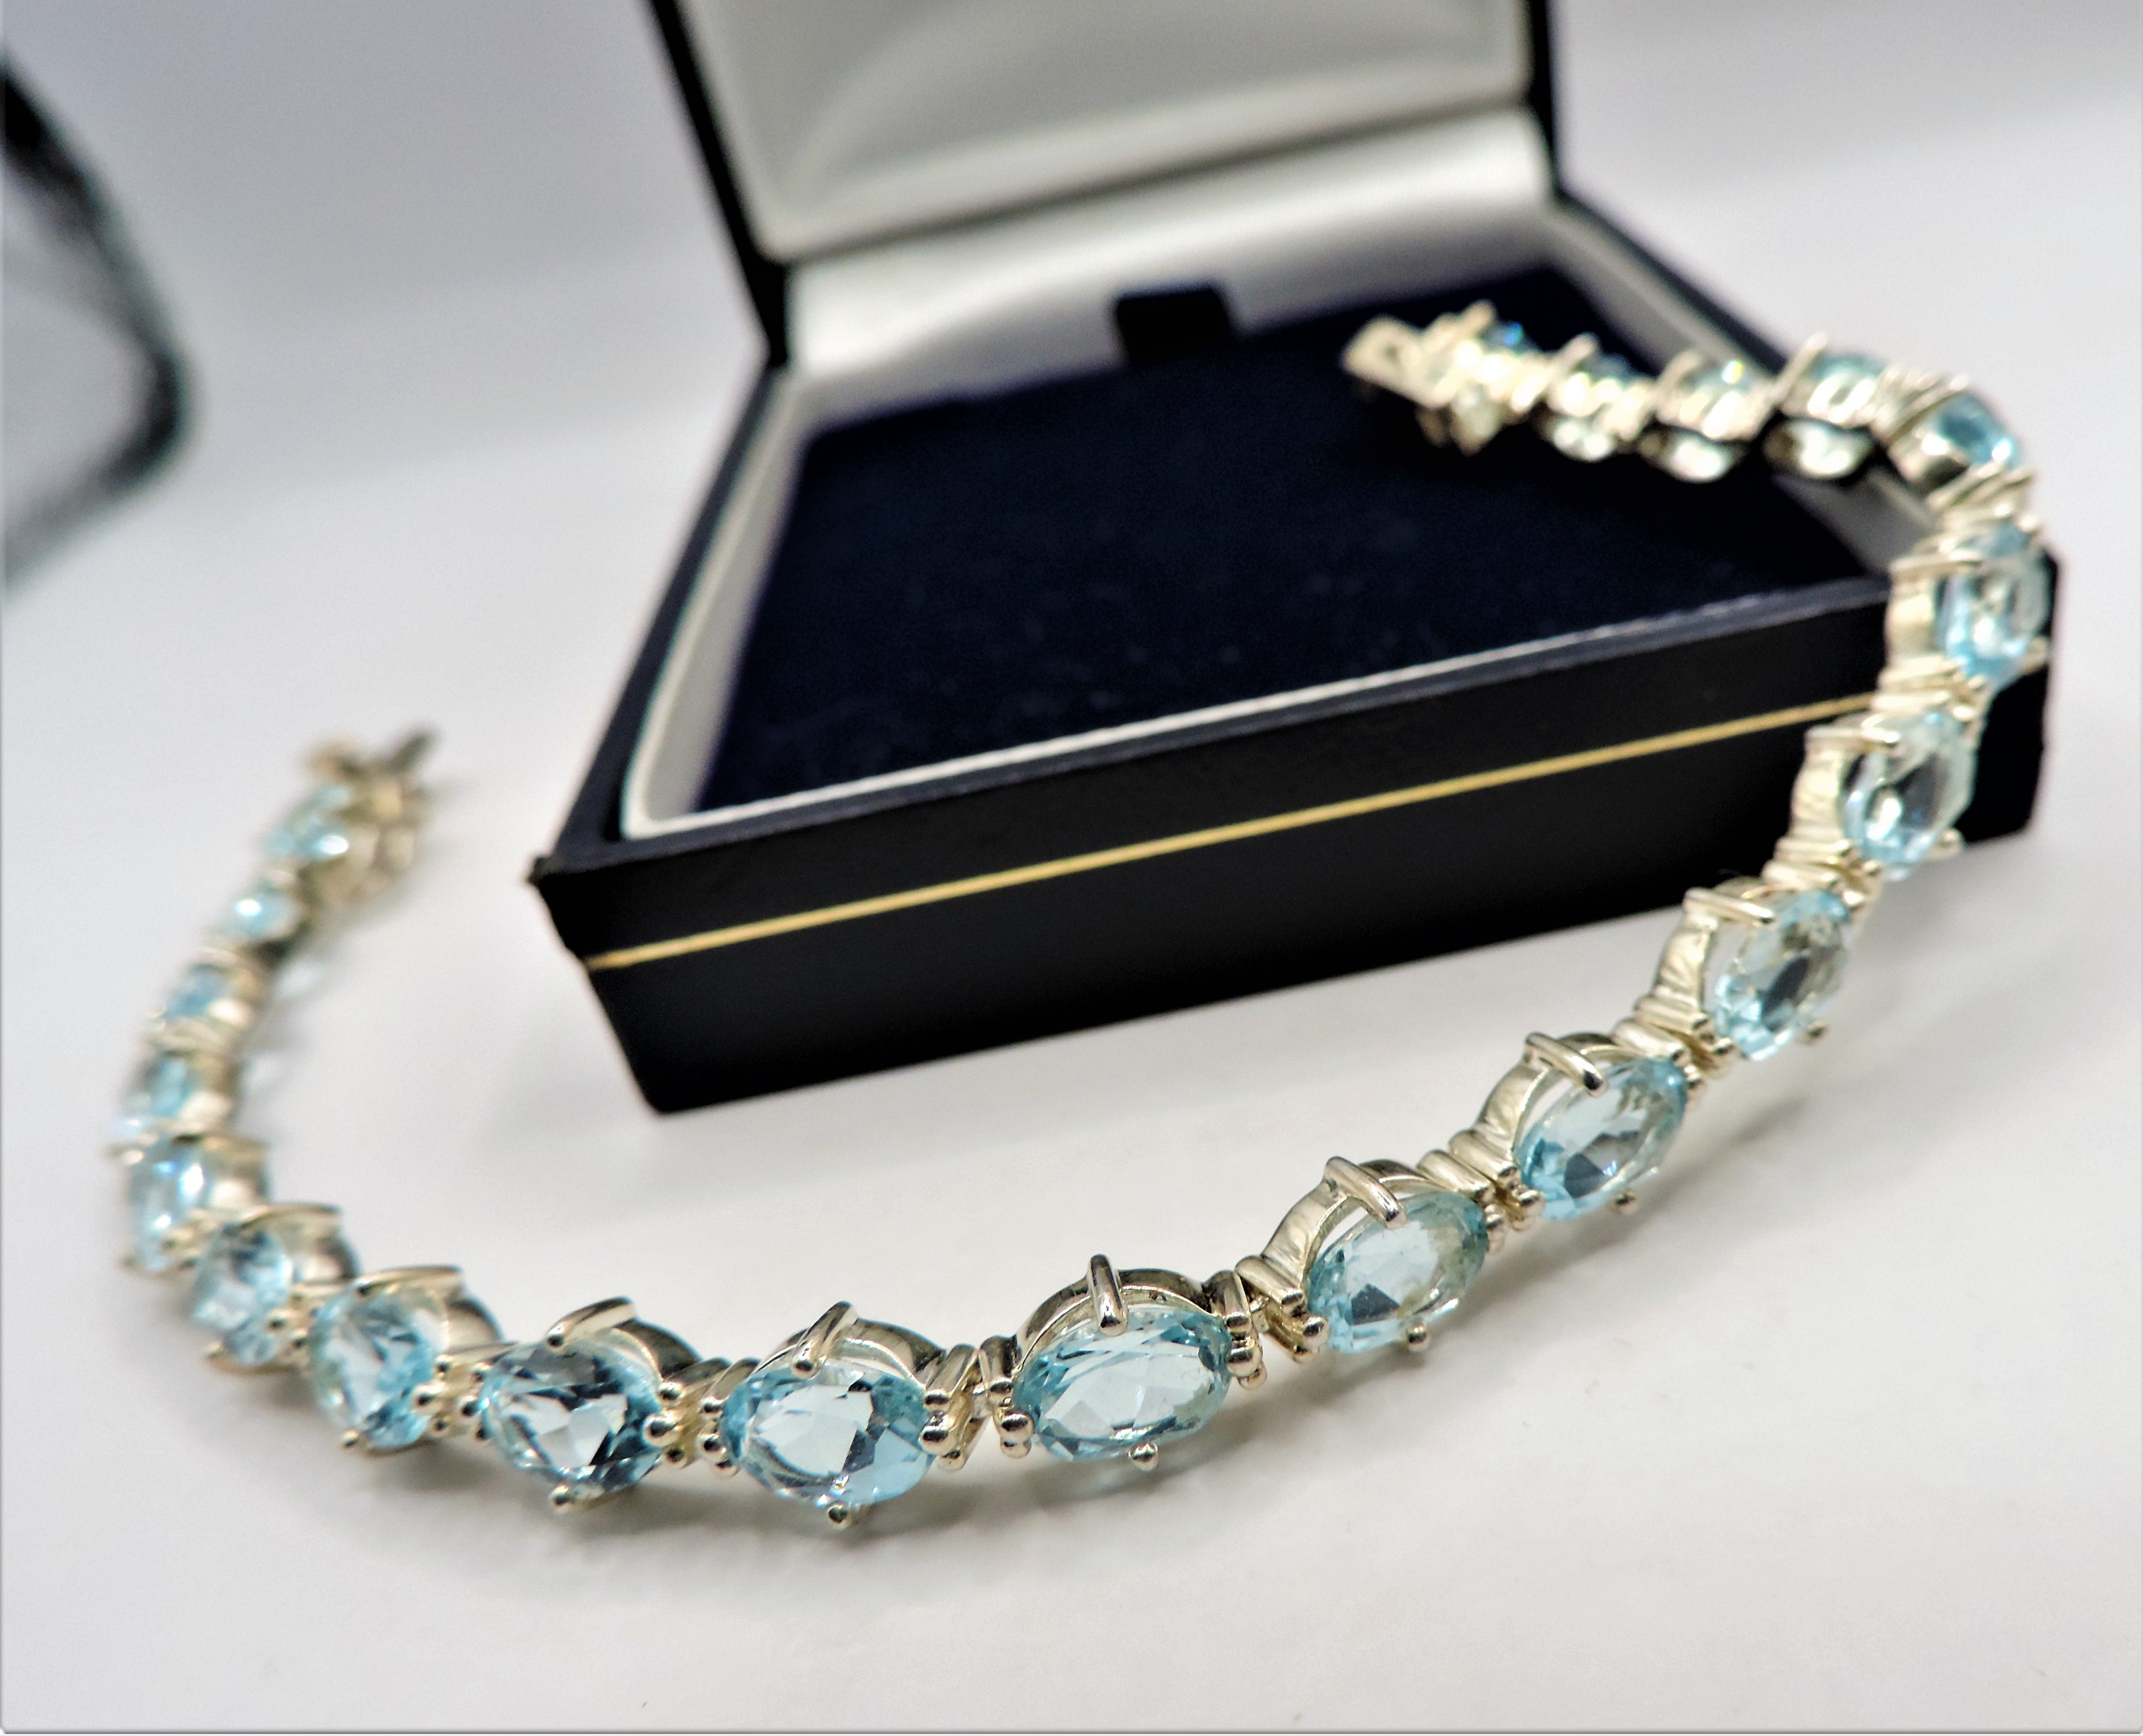 Sterling Silver 22CT Blue Topaz Bracelet 'New' with Gift Box - Image 3 of 6